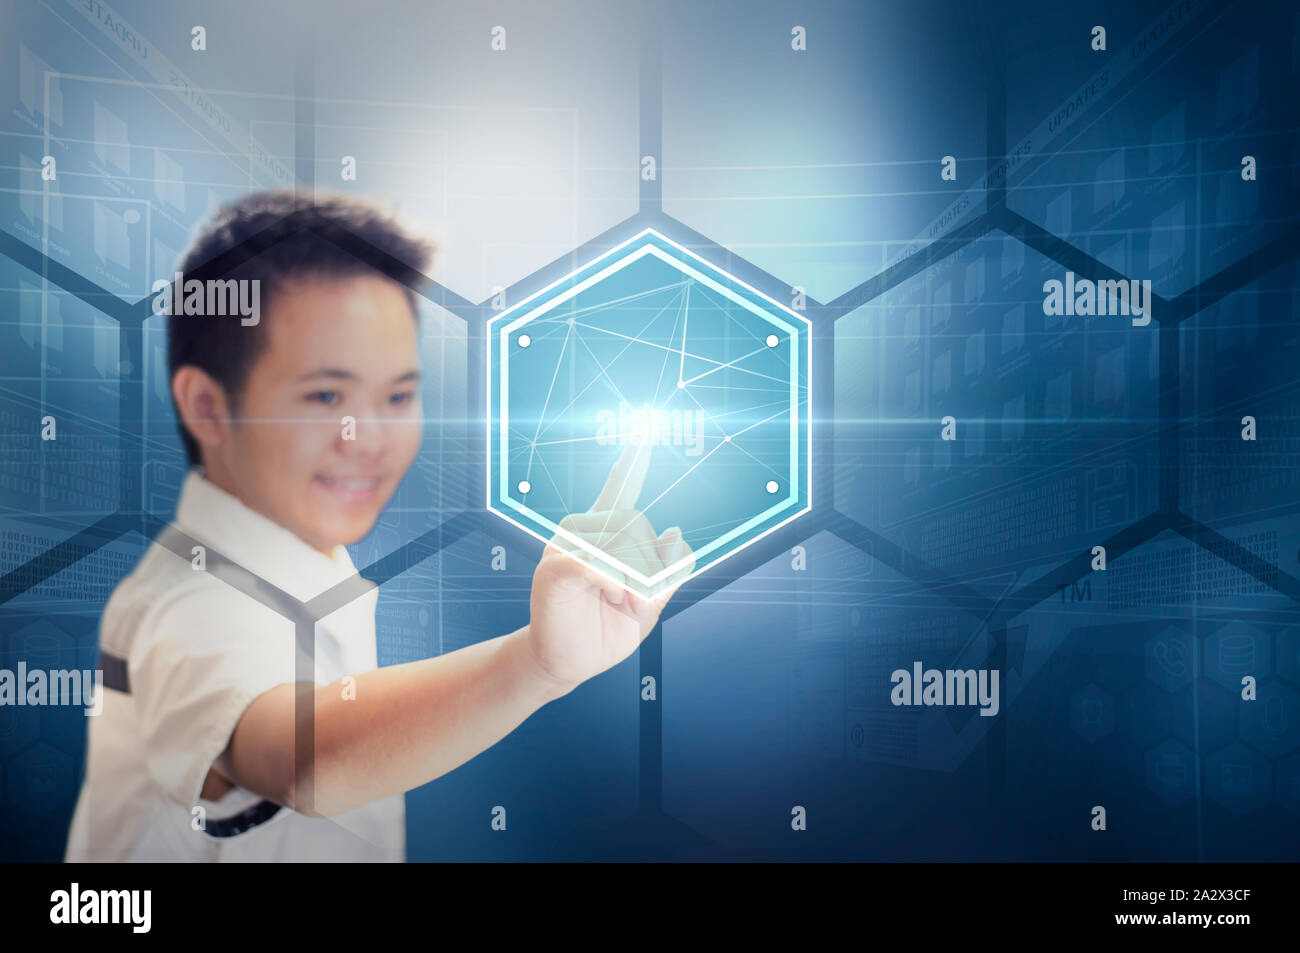 A Young Man Touching a Hexagon Plate Virtual Button On a Virtual Hologram Screen. Modern Technology and Futuristic Concept. Stock Photo